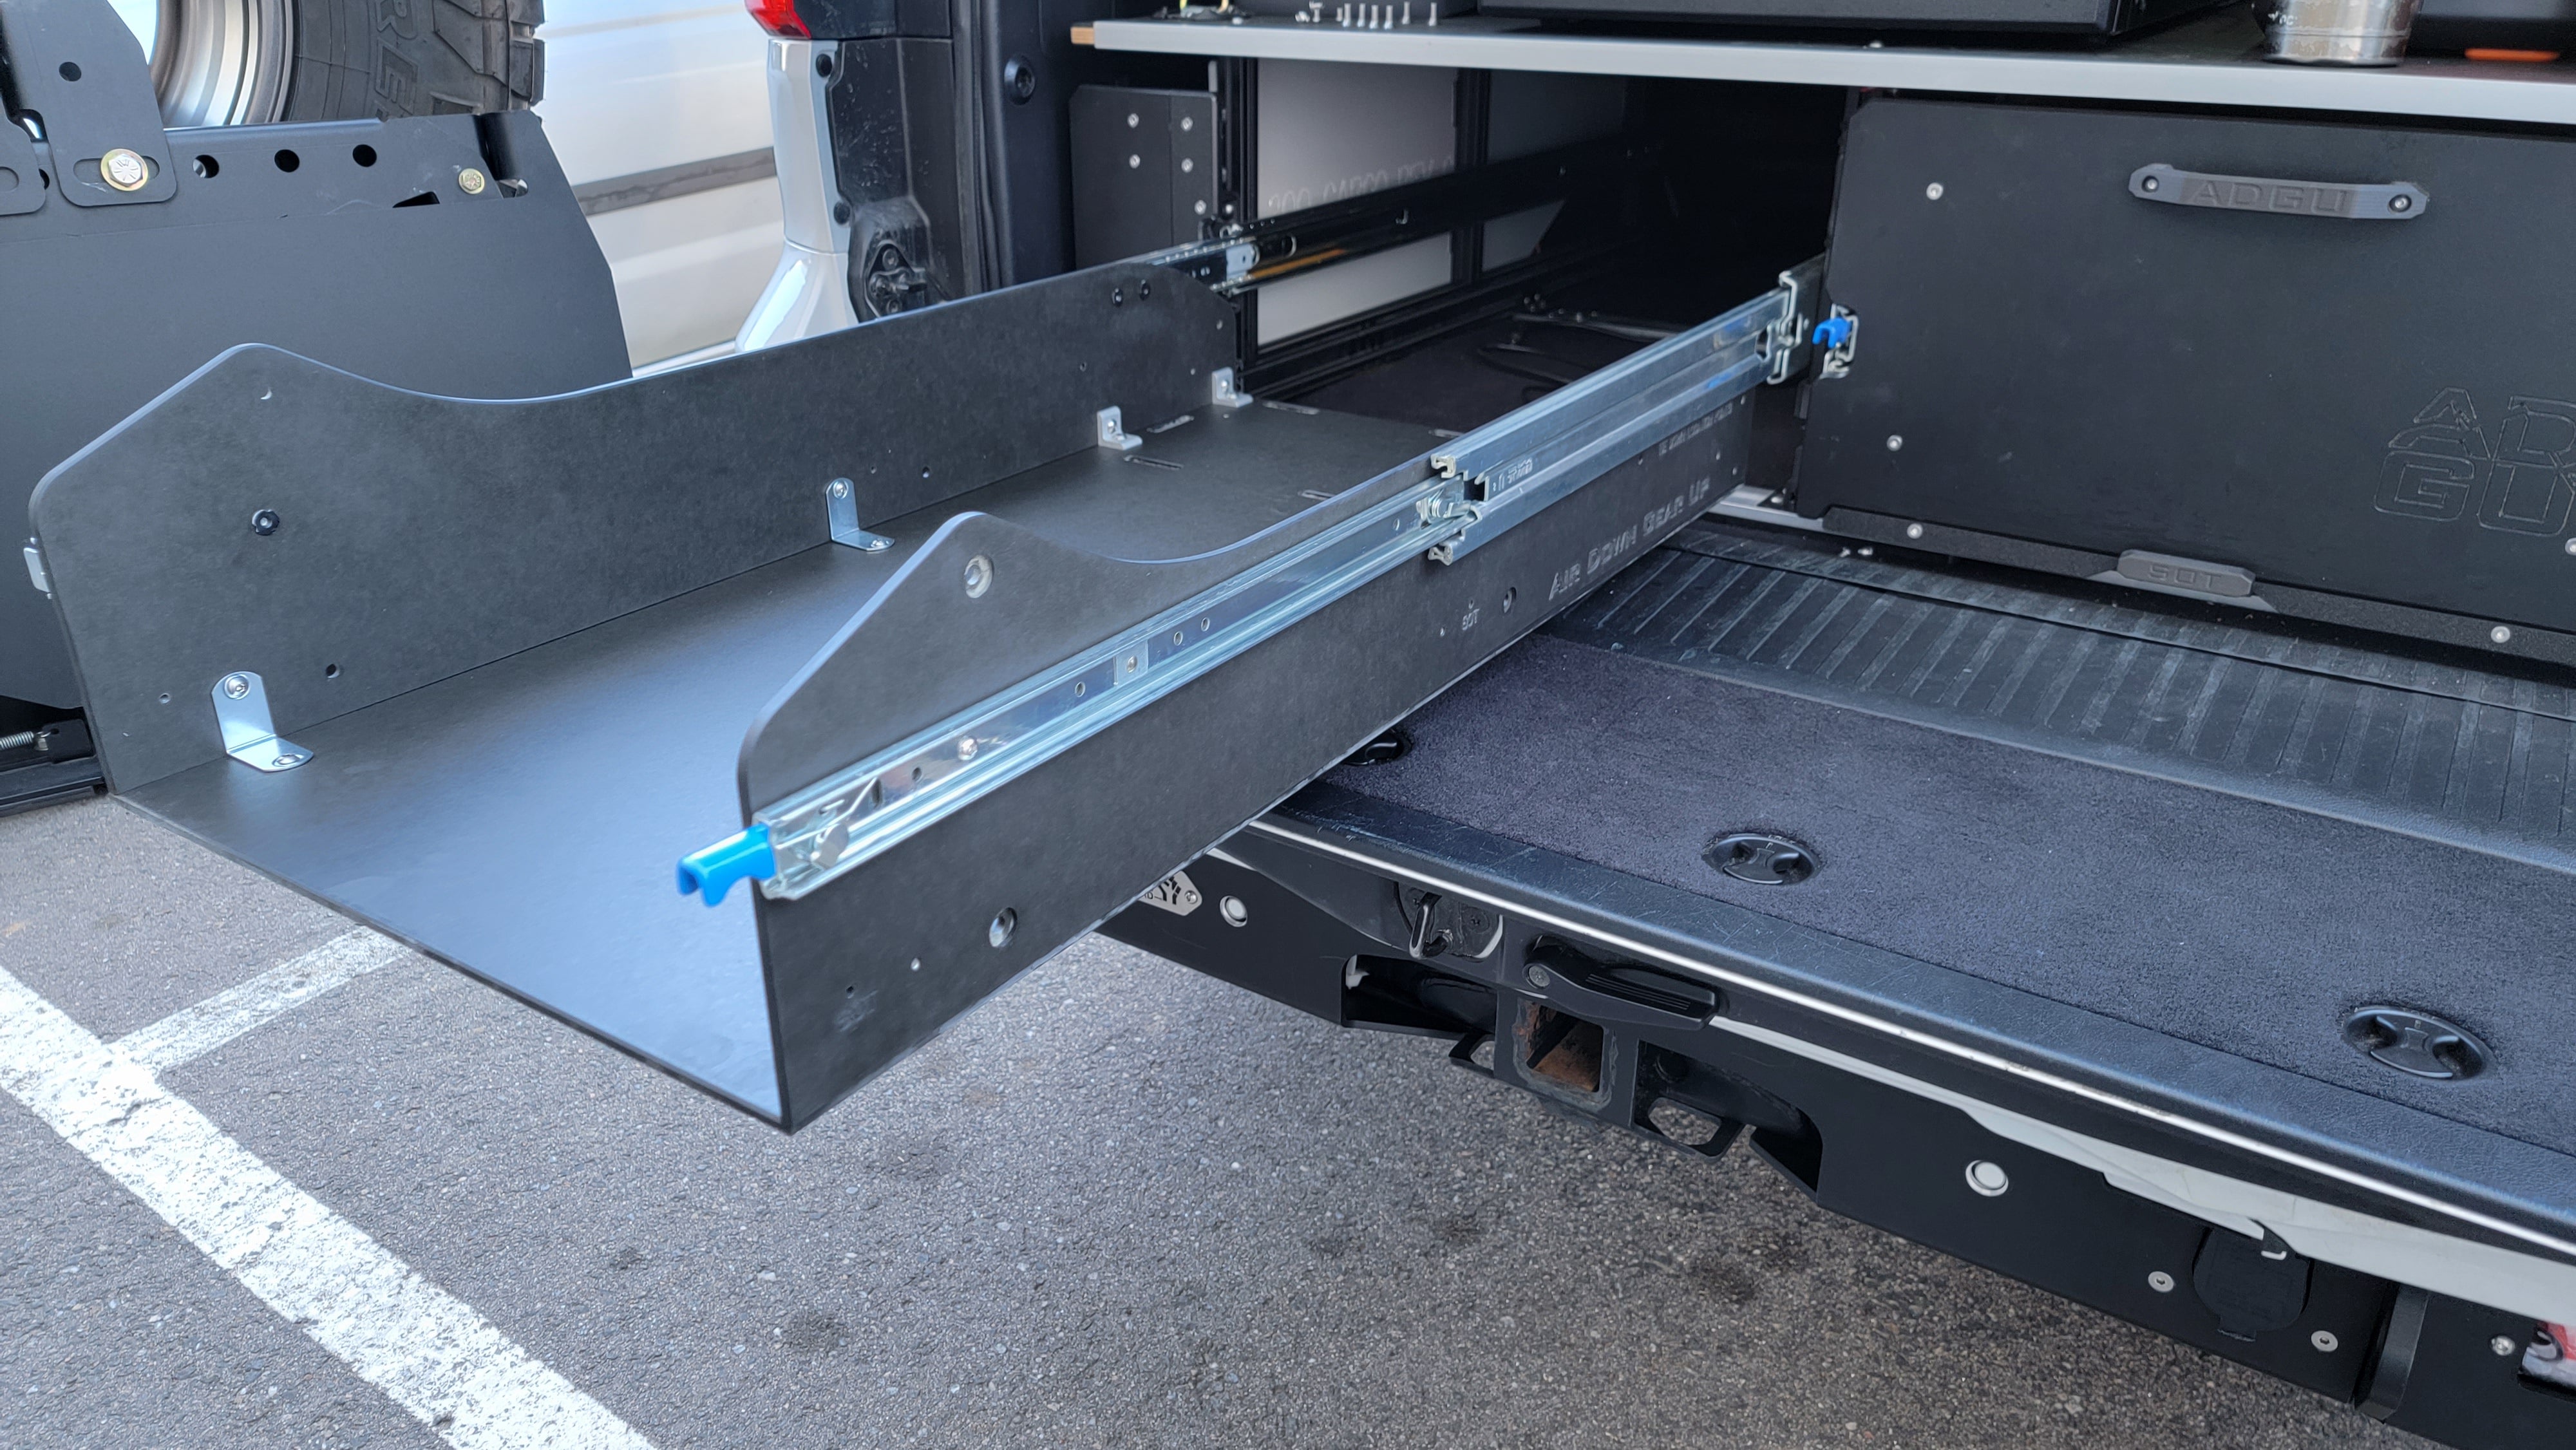 Drawer Fridge Sliding Tray - Perfectly Fit for Dometic CD30 and Batter –  Air Down Gear Up